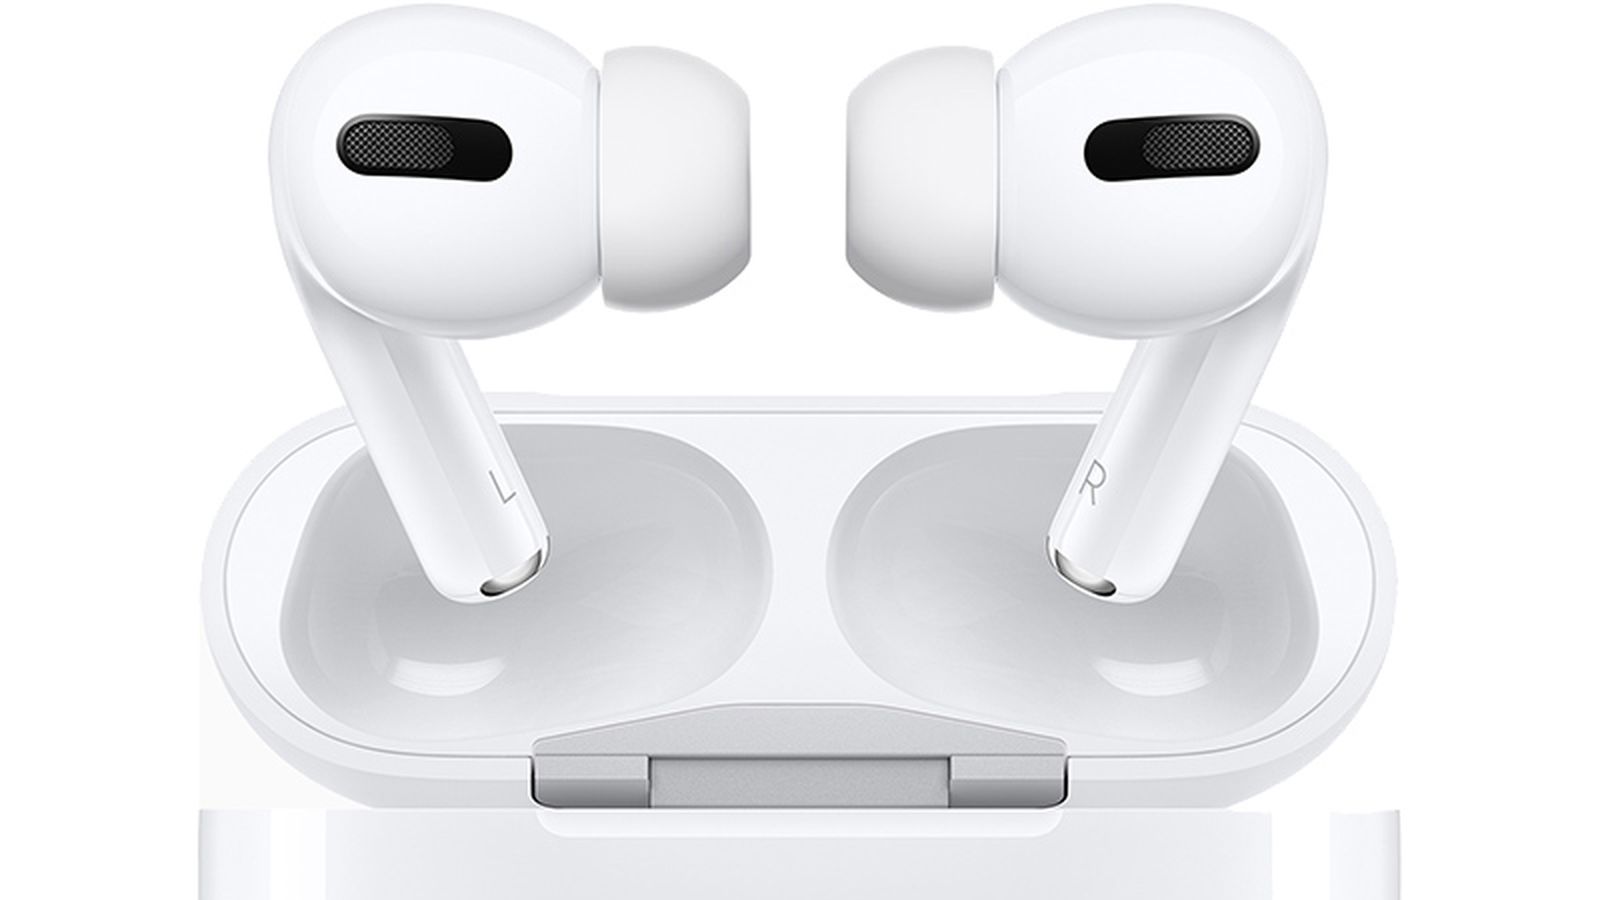 Deals: Apple's AirPods Pro Are In Stock for $234.98 on Amazon 